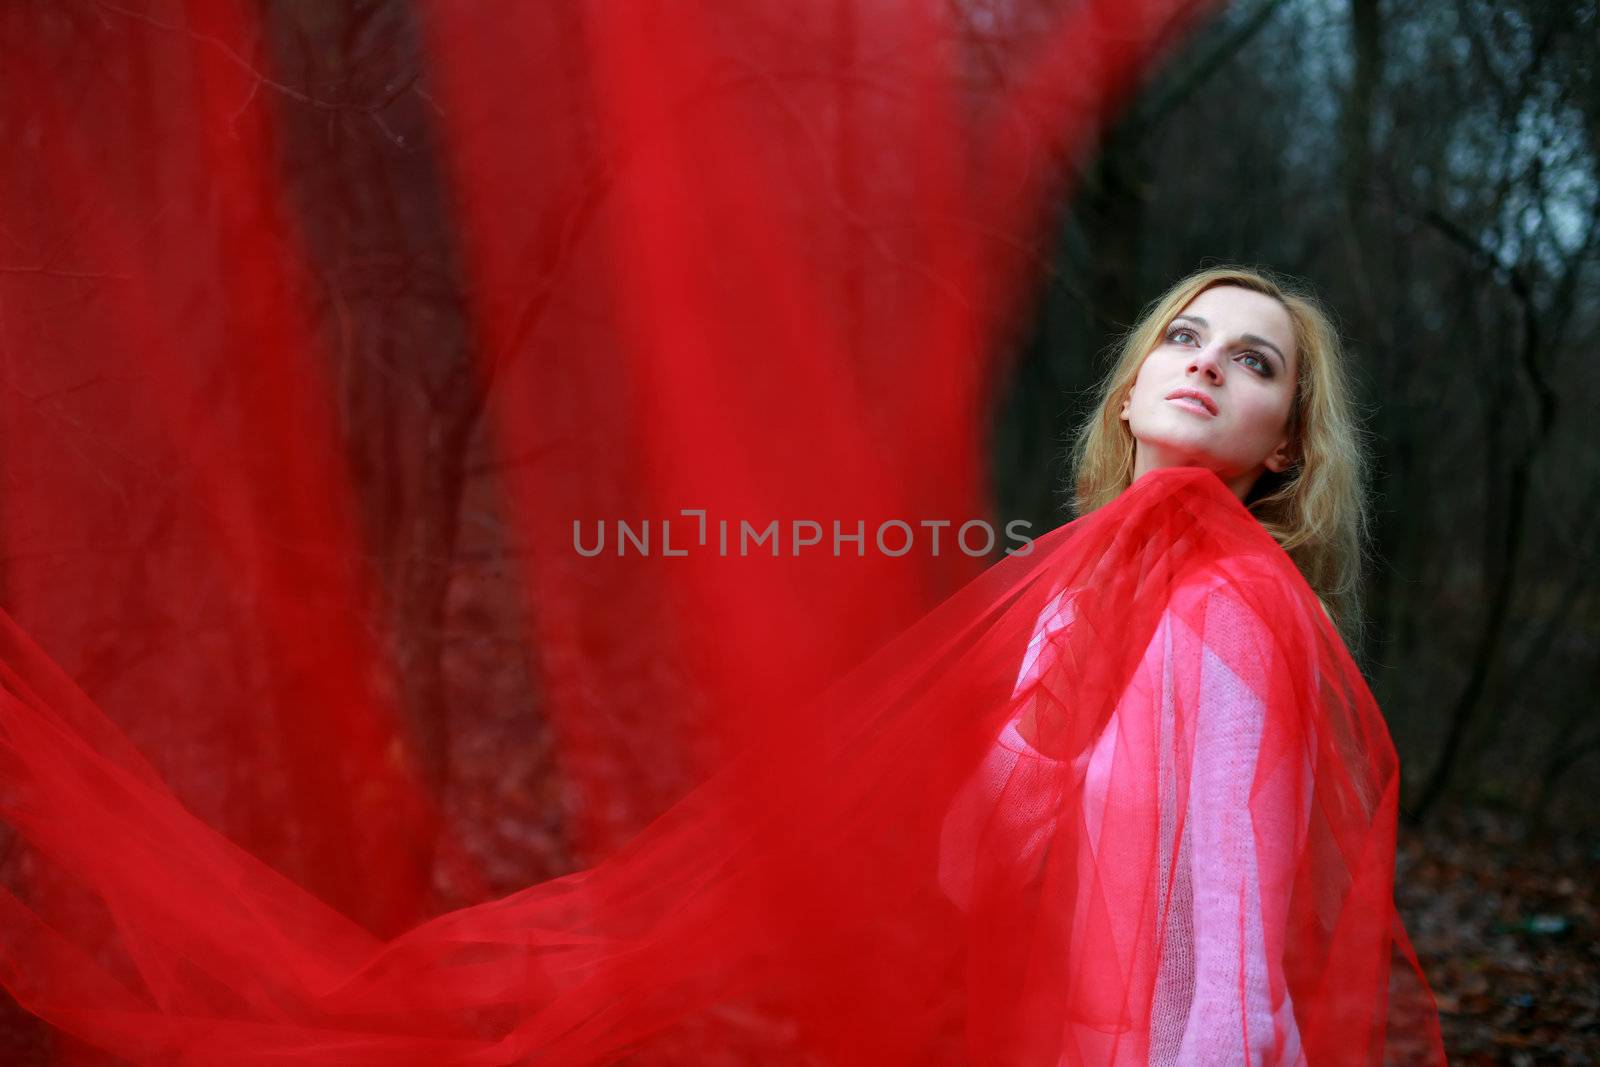 A beautiful young woman with a red shawl